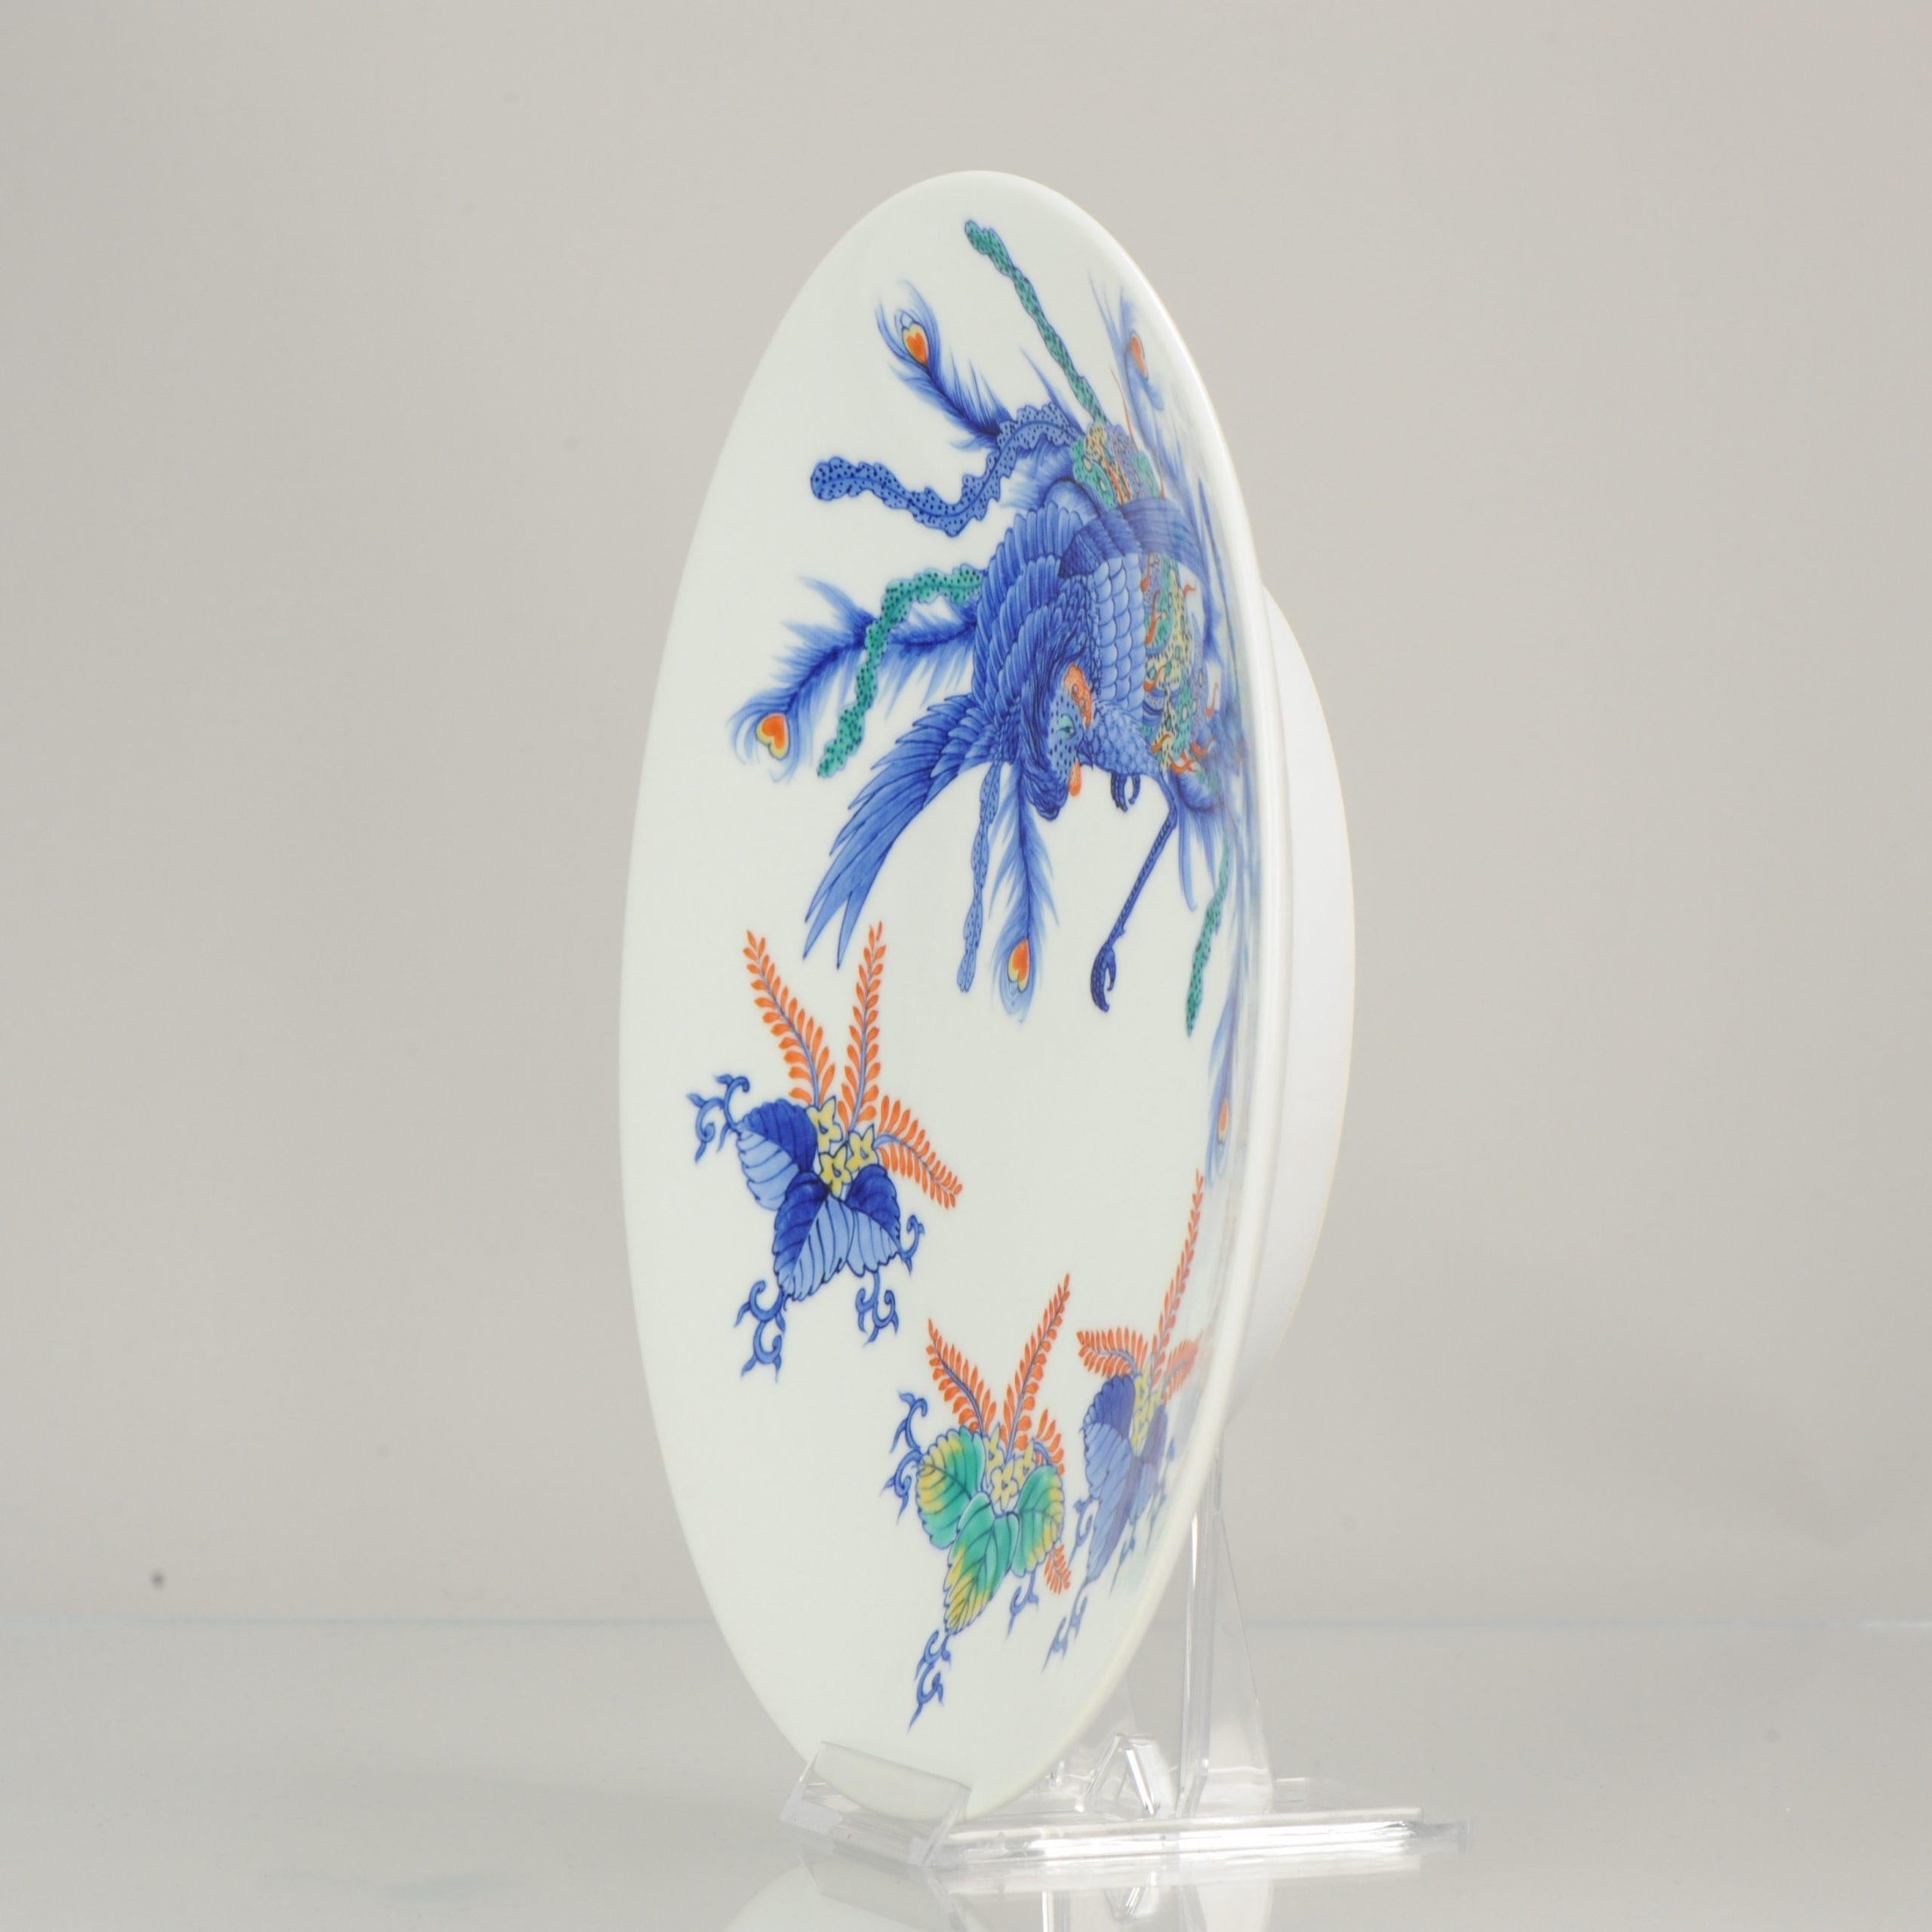 Lovely Japanese porcelain plate with nice bright coloring and an interestings scene.
Condition
Overall condition perfect. Measure: 267mm.